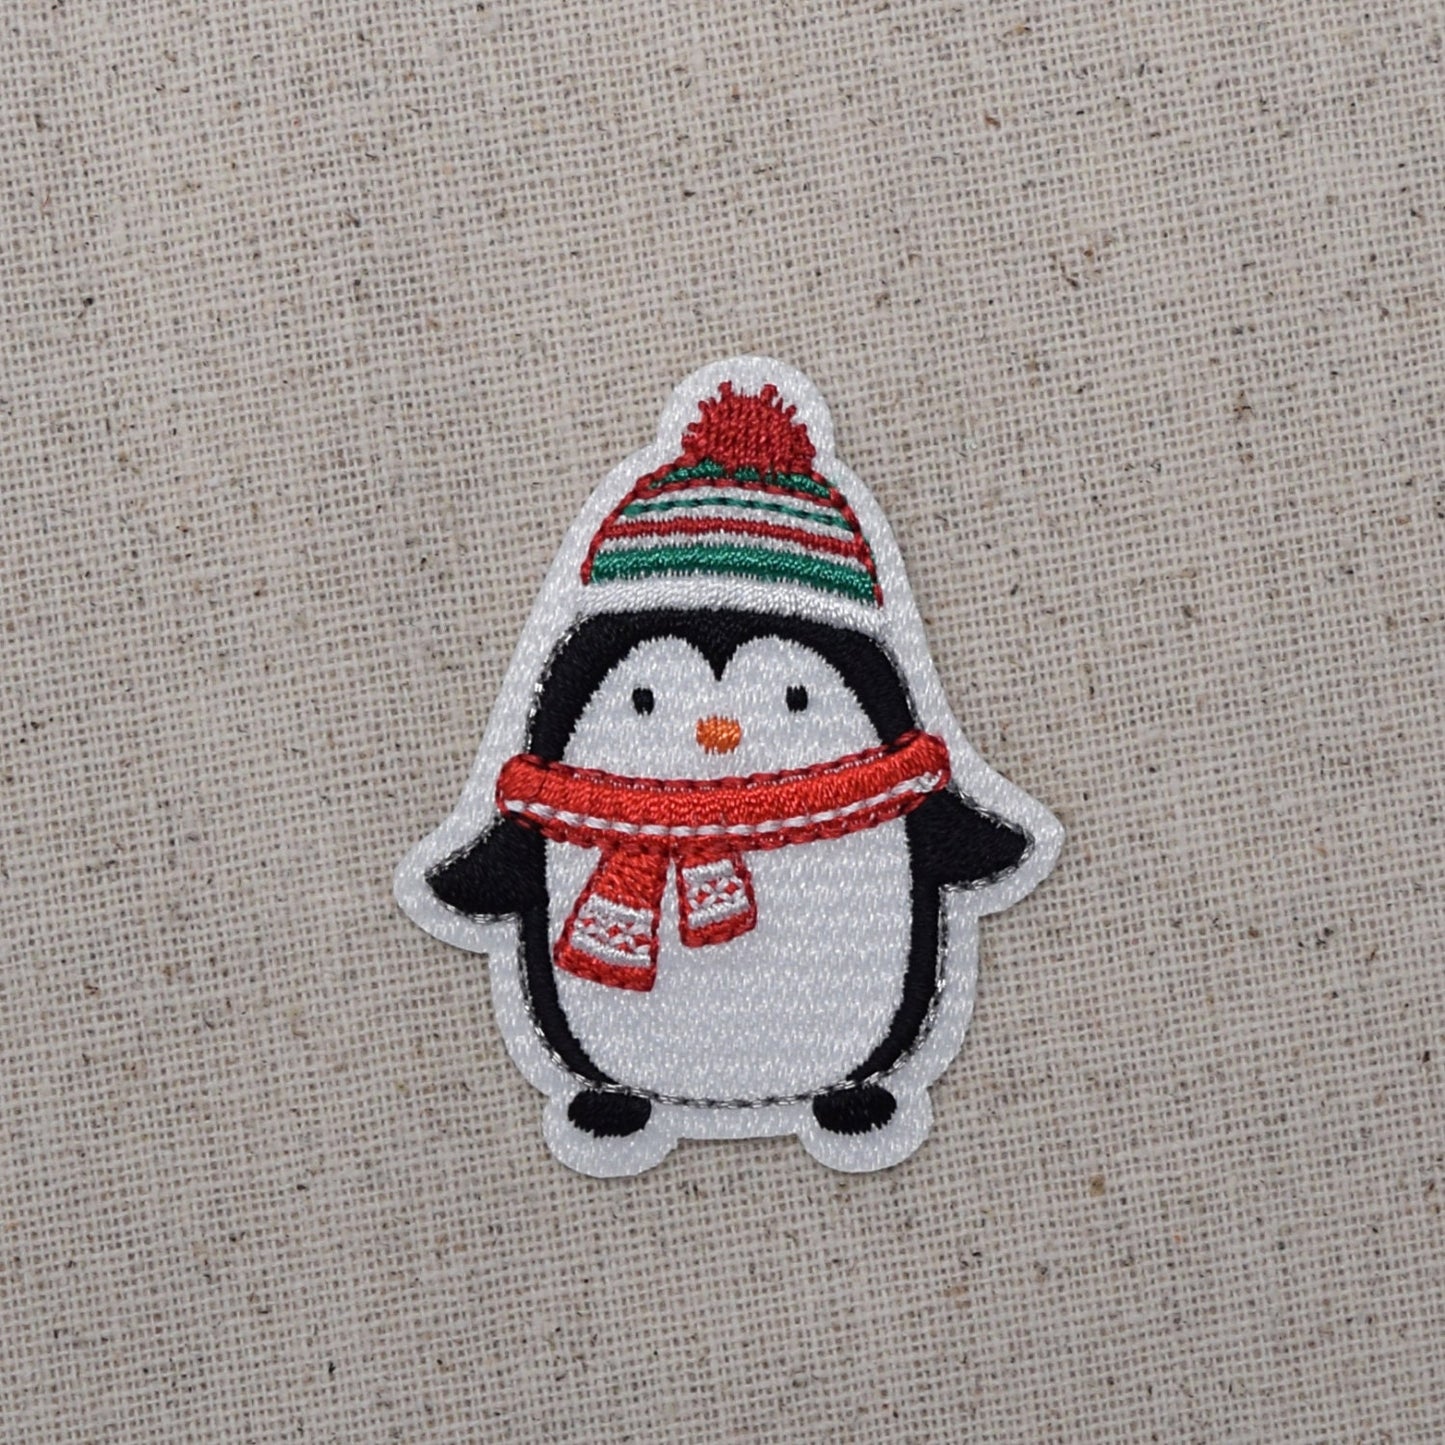 Christmas Penguin wearing Scarf and Beanie - Embroidered Iron on Patch